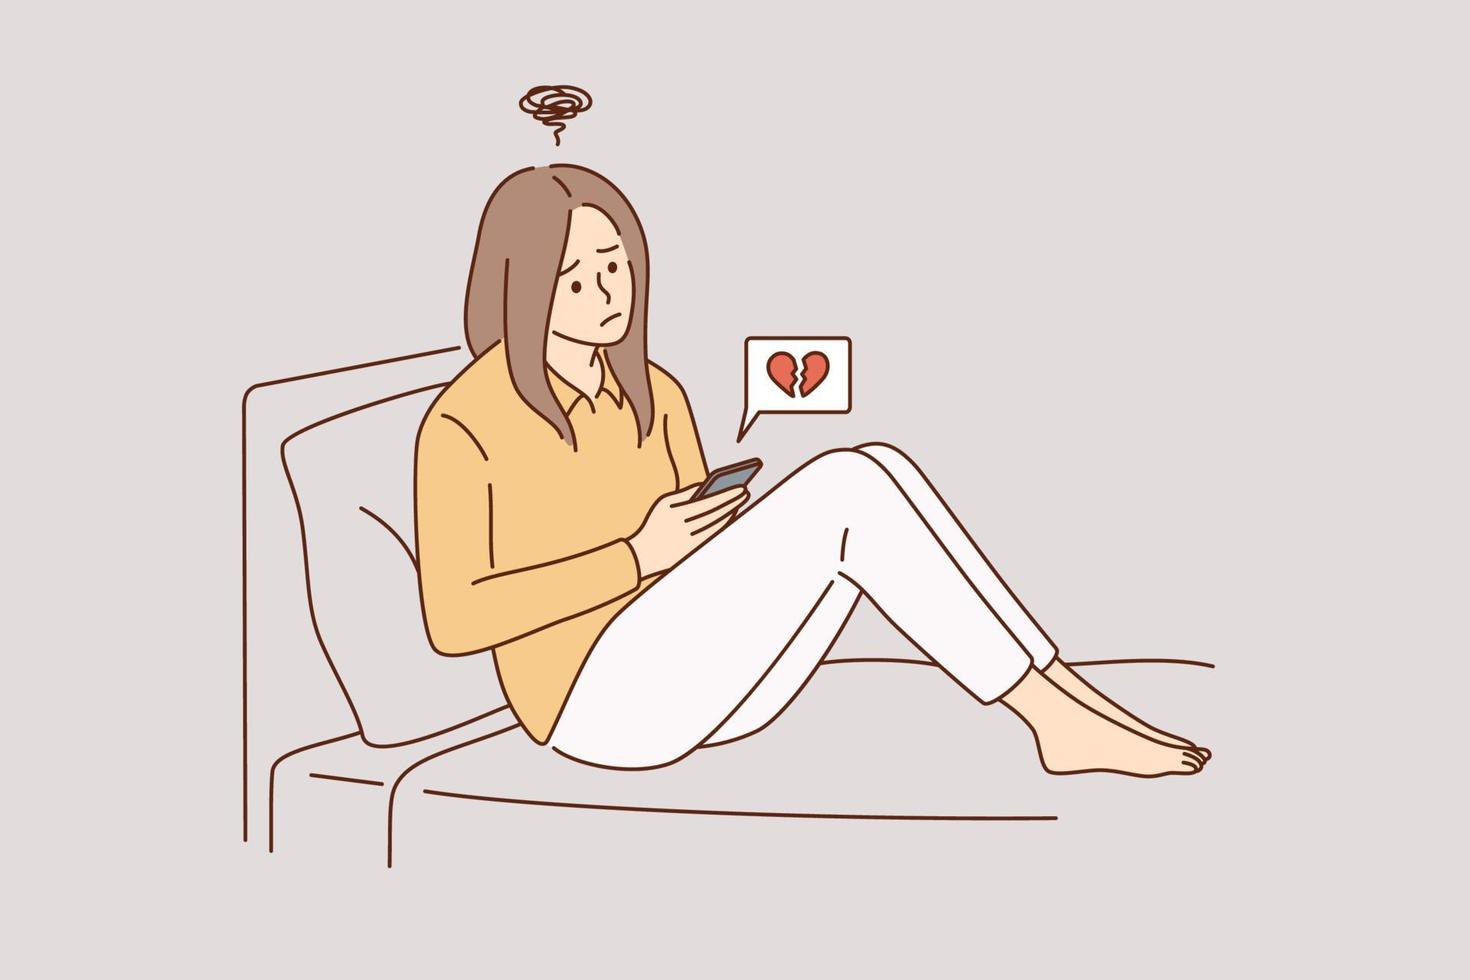 Online dating and broken heart concept. Young unhappy sad disappointed girl cartoon character sitting communicating online with boyfriend breaking up vector illustration